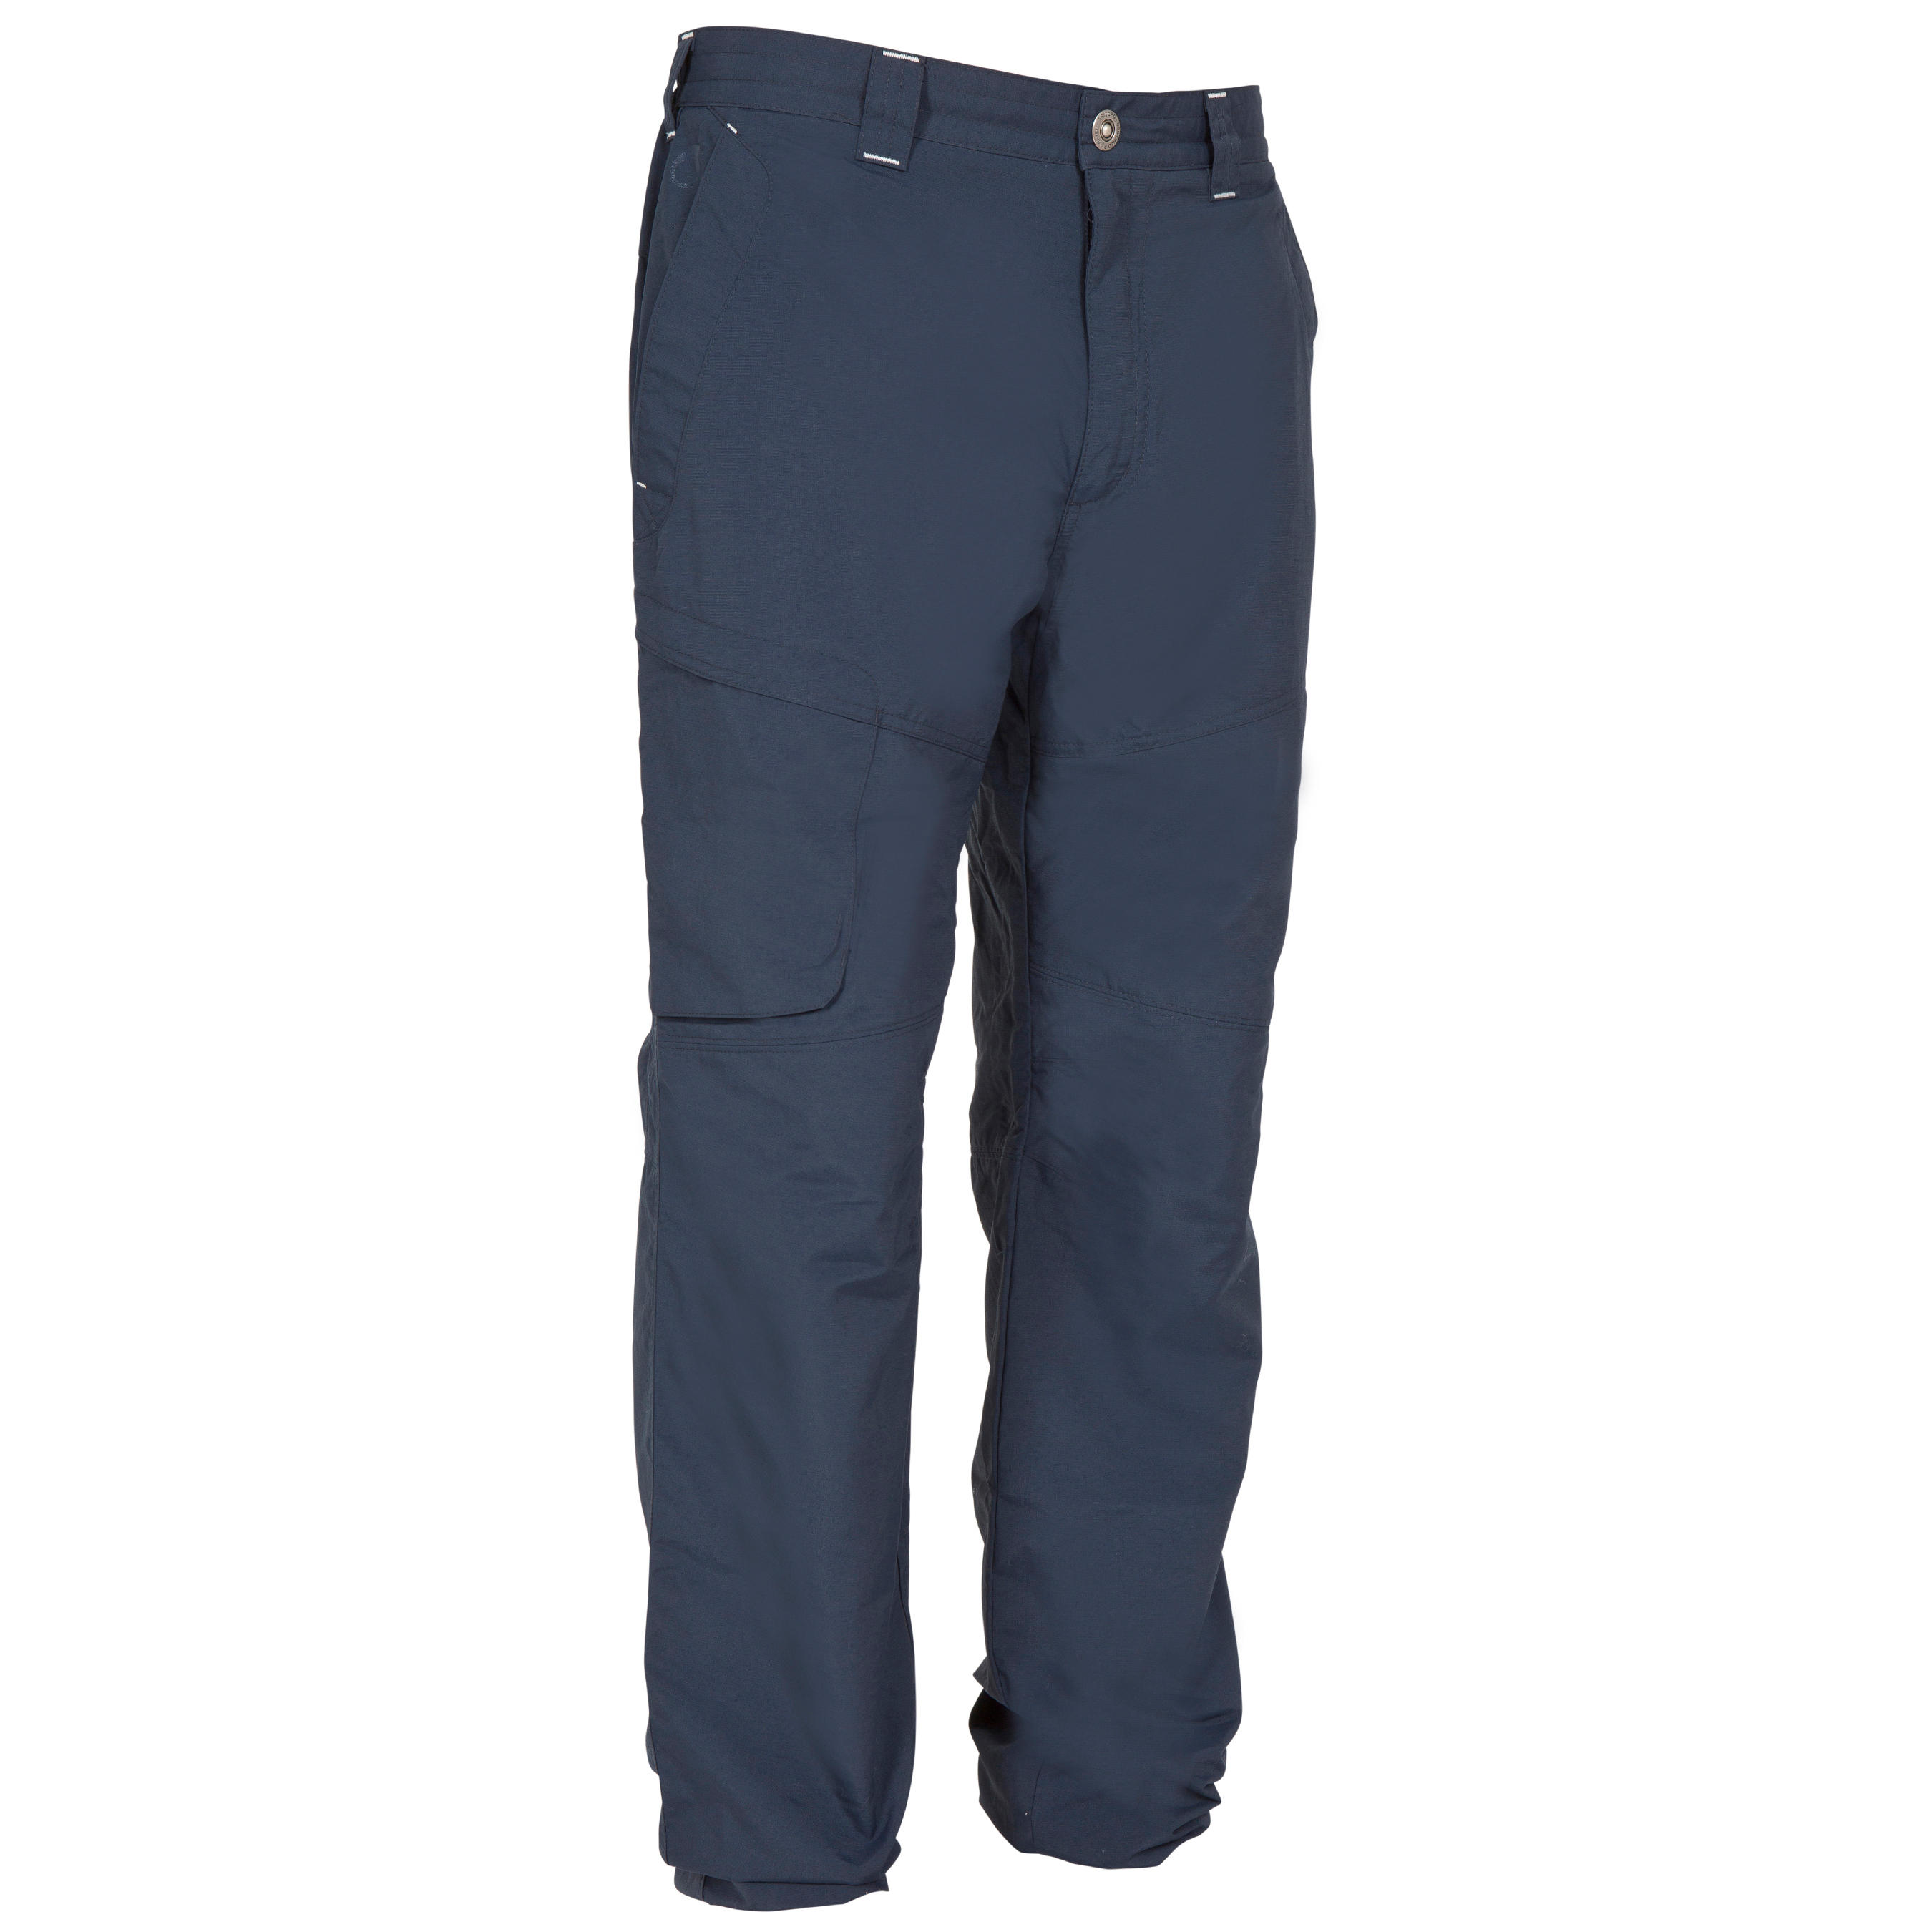 TRIBORD Ozean men's water repellent trousers with sun protection factor 40+ - Dark blue